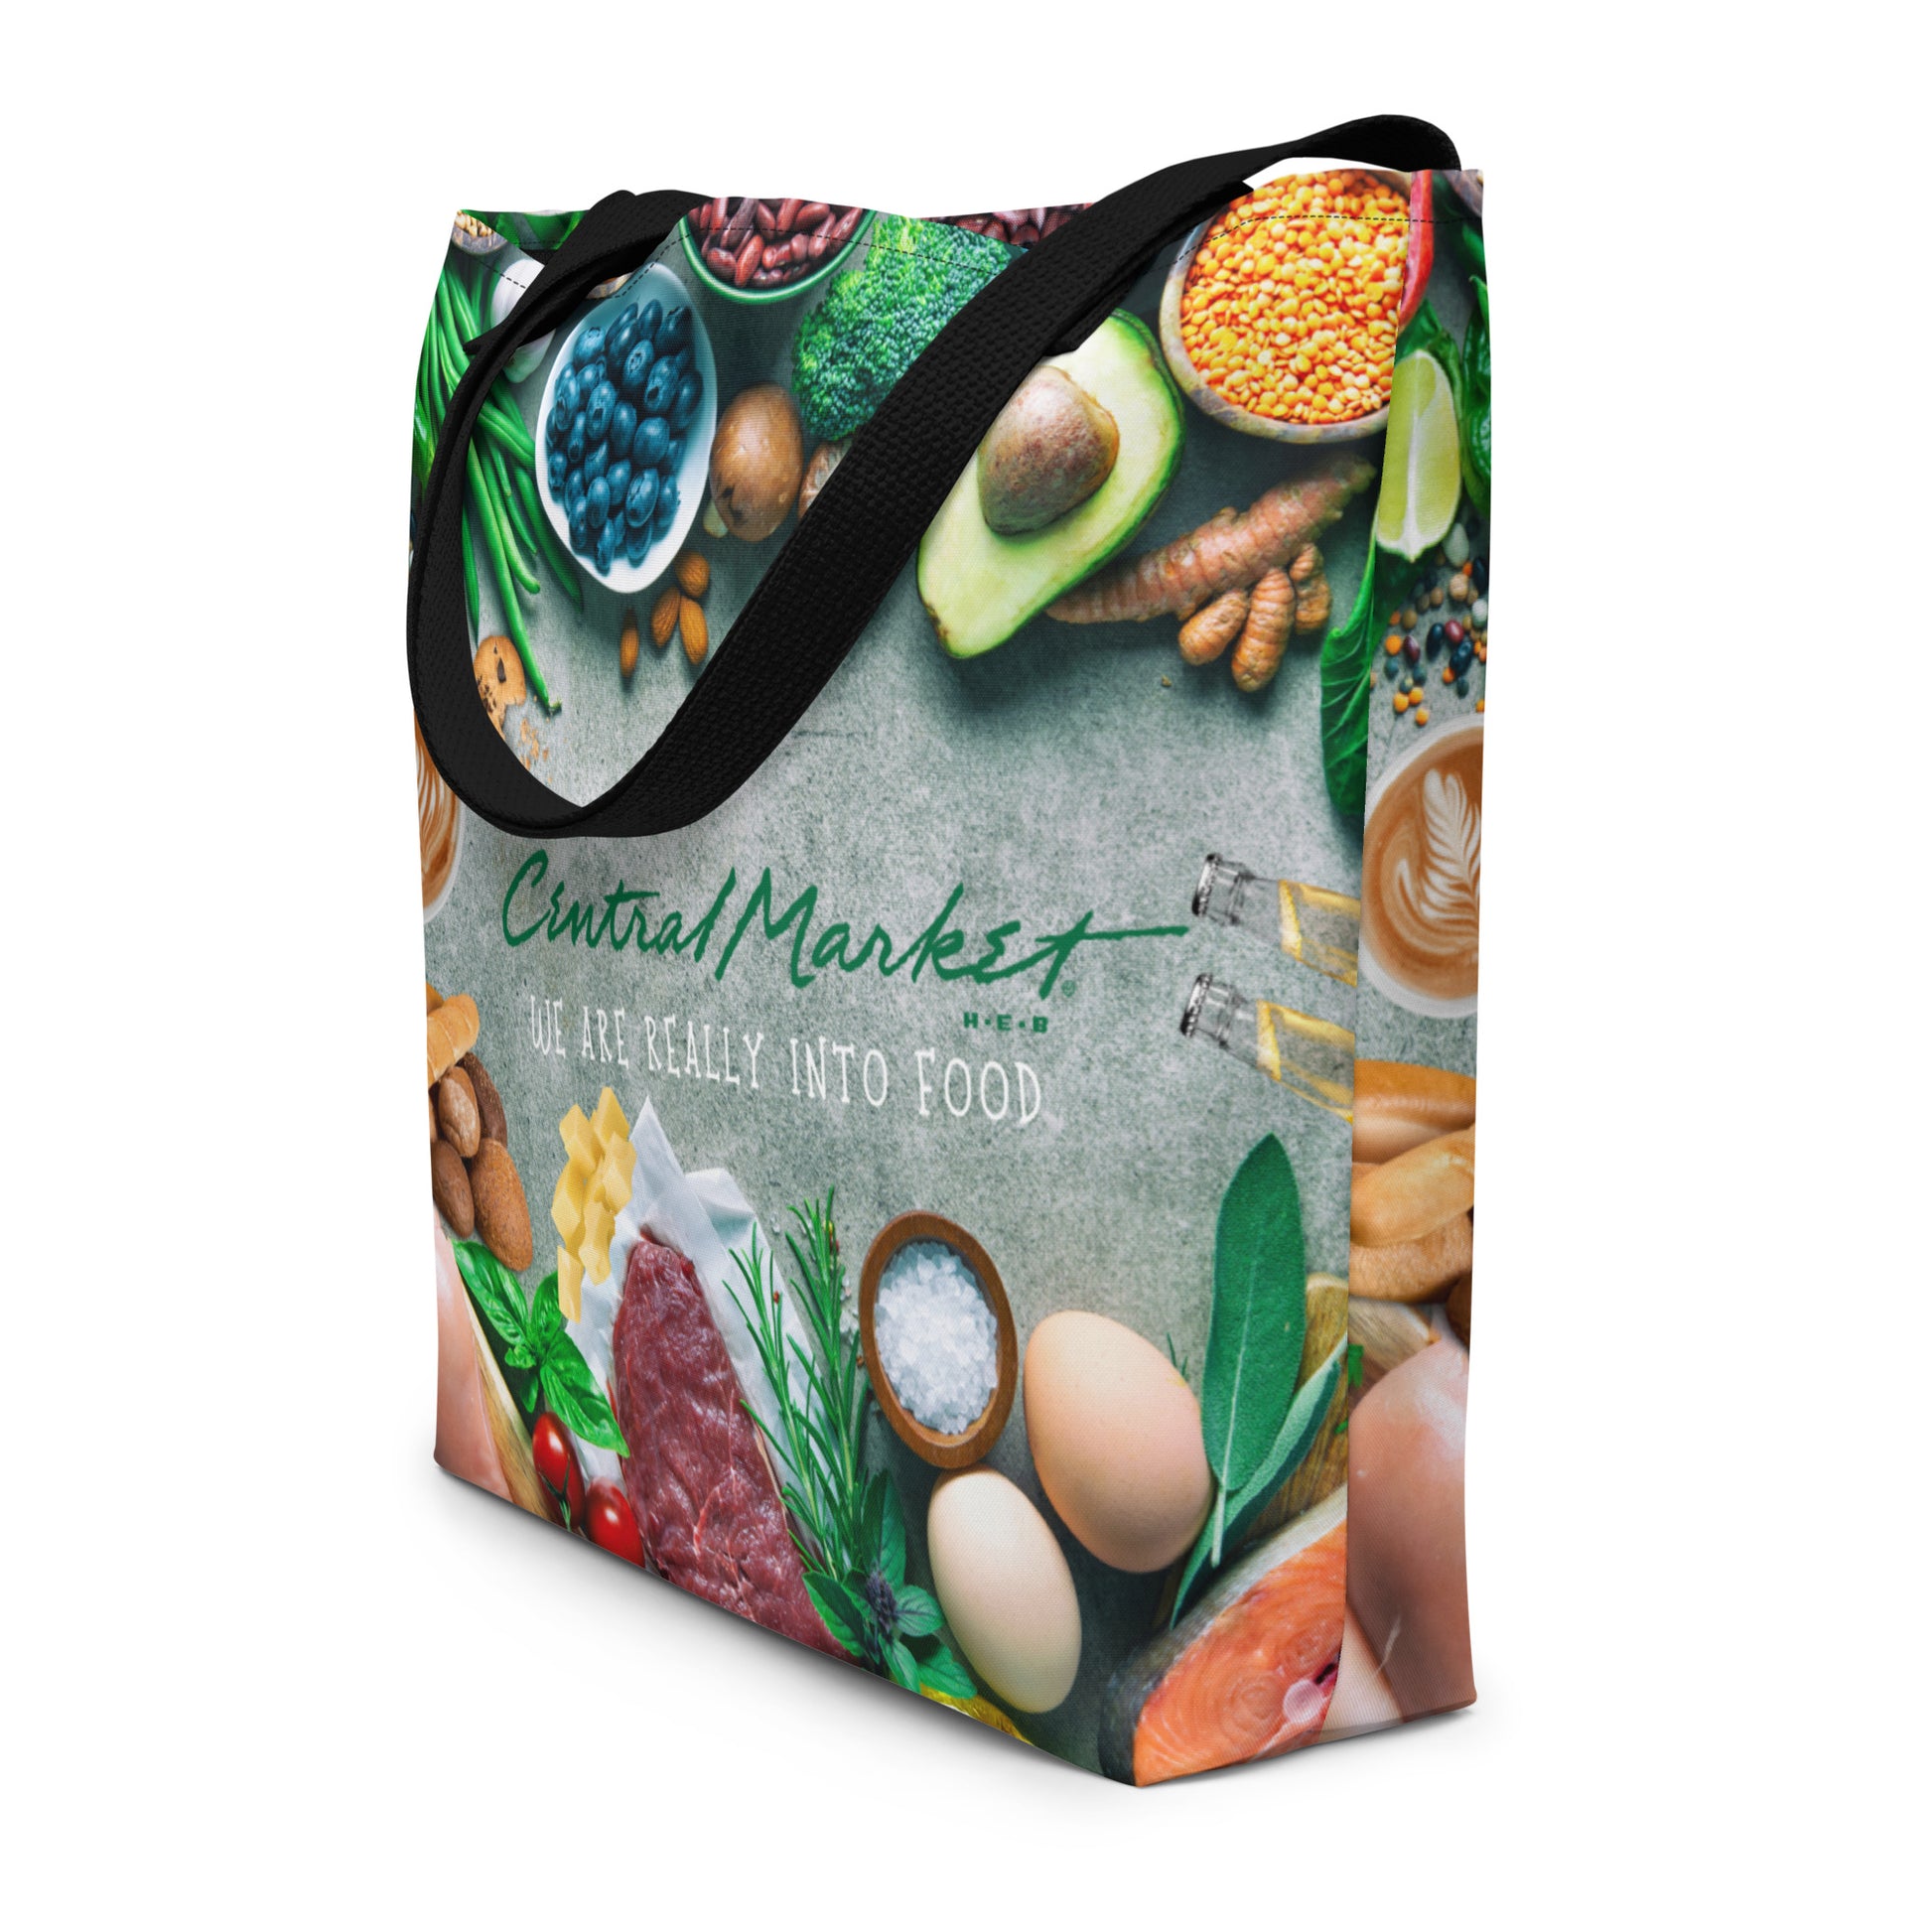 Central Market Food Market All-Over Print Large Tote Bag CedarHill Country Market